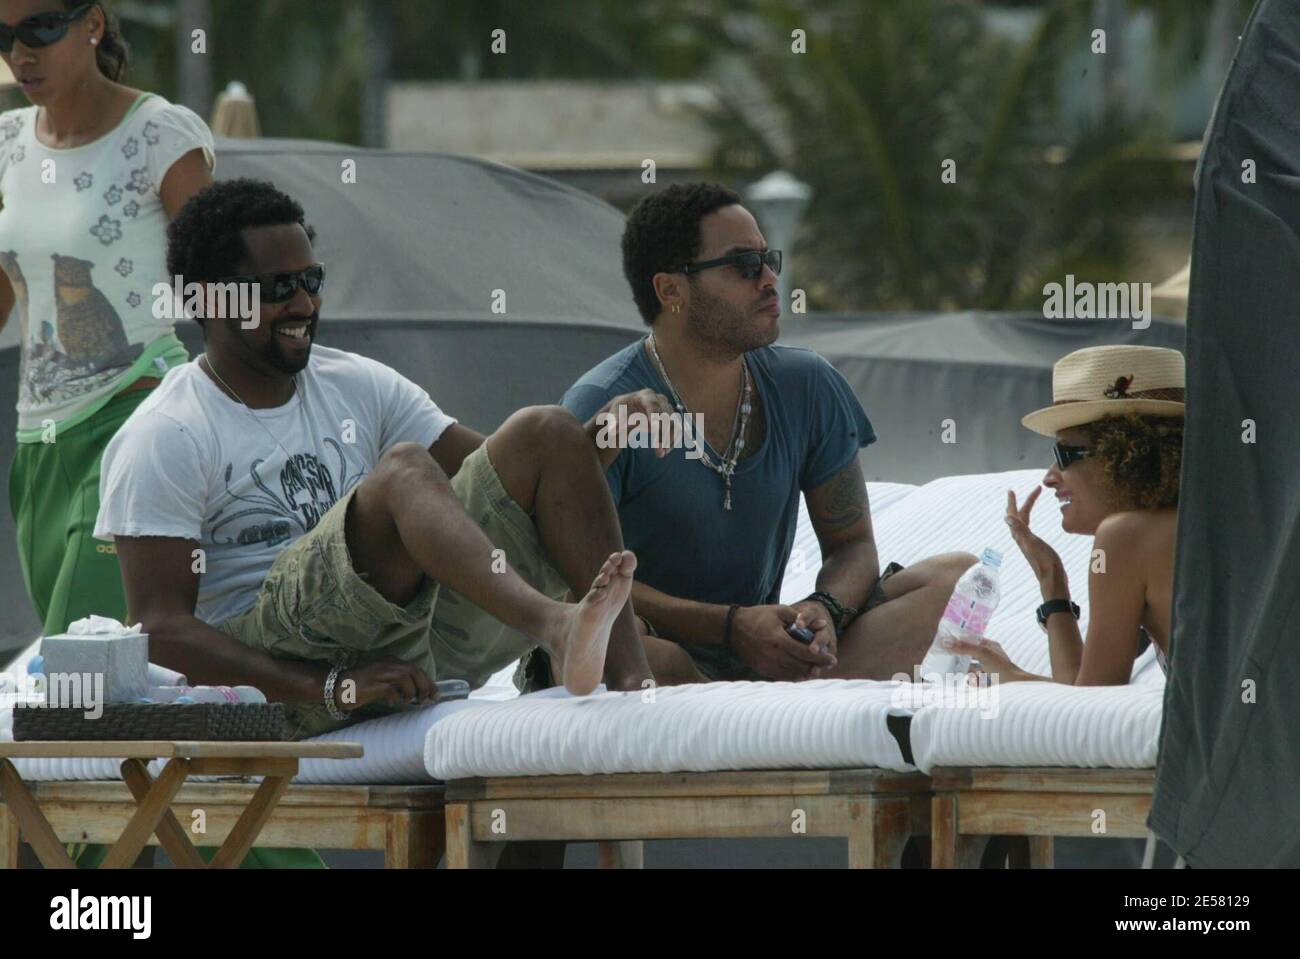 Barbara Becker looks very pleased to see Rockstar Lenny Kravitz where she  spent time with him and friends in the sun on Miami Beach, FL 03/31/07  [[mab]] Stock Photo - Alamy